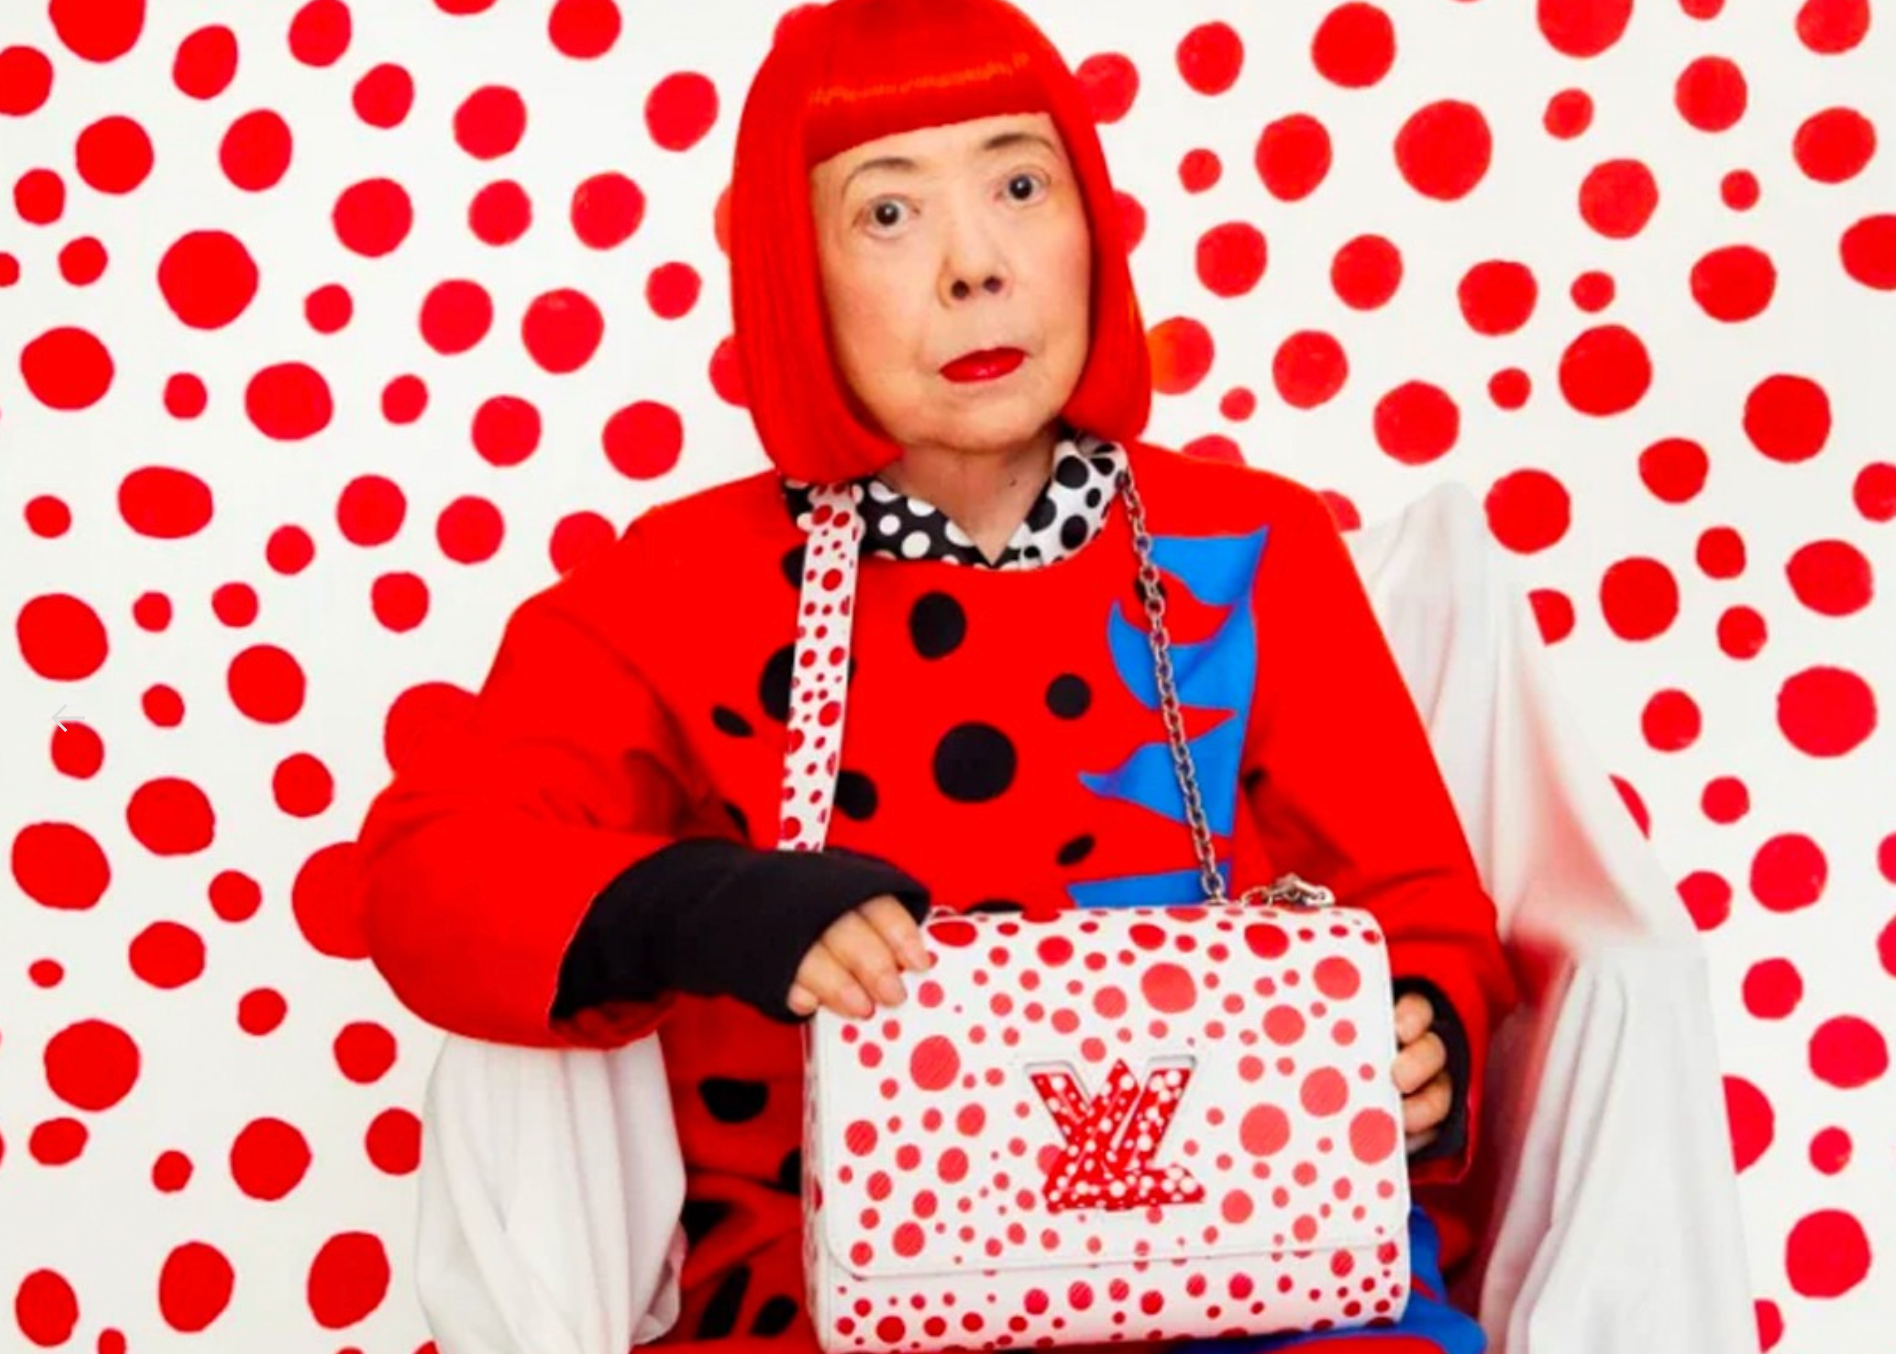 First Look at the Upcoming Louis Vuitton x Yayoi Kusama Collaboration